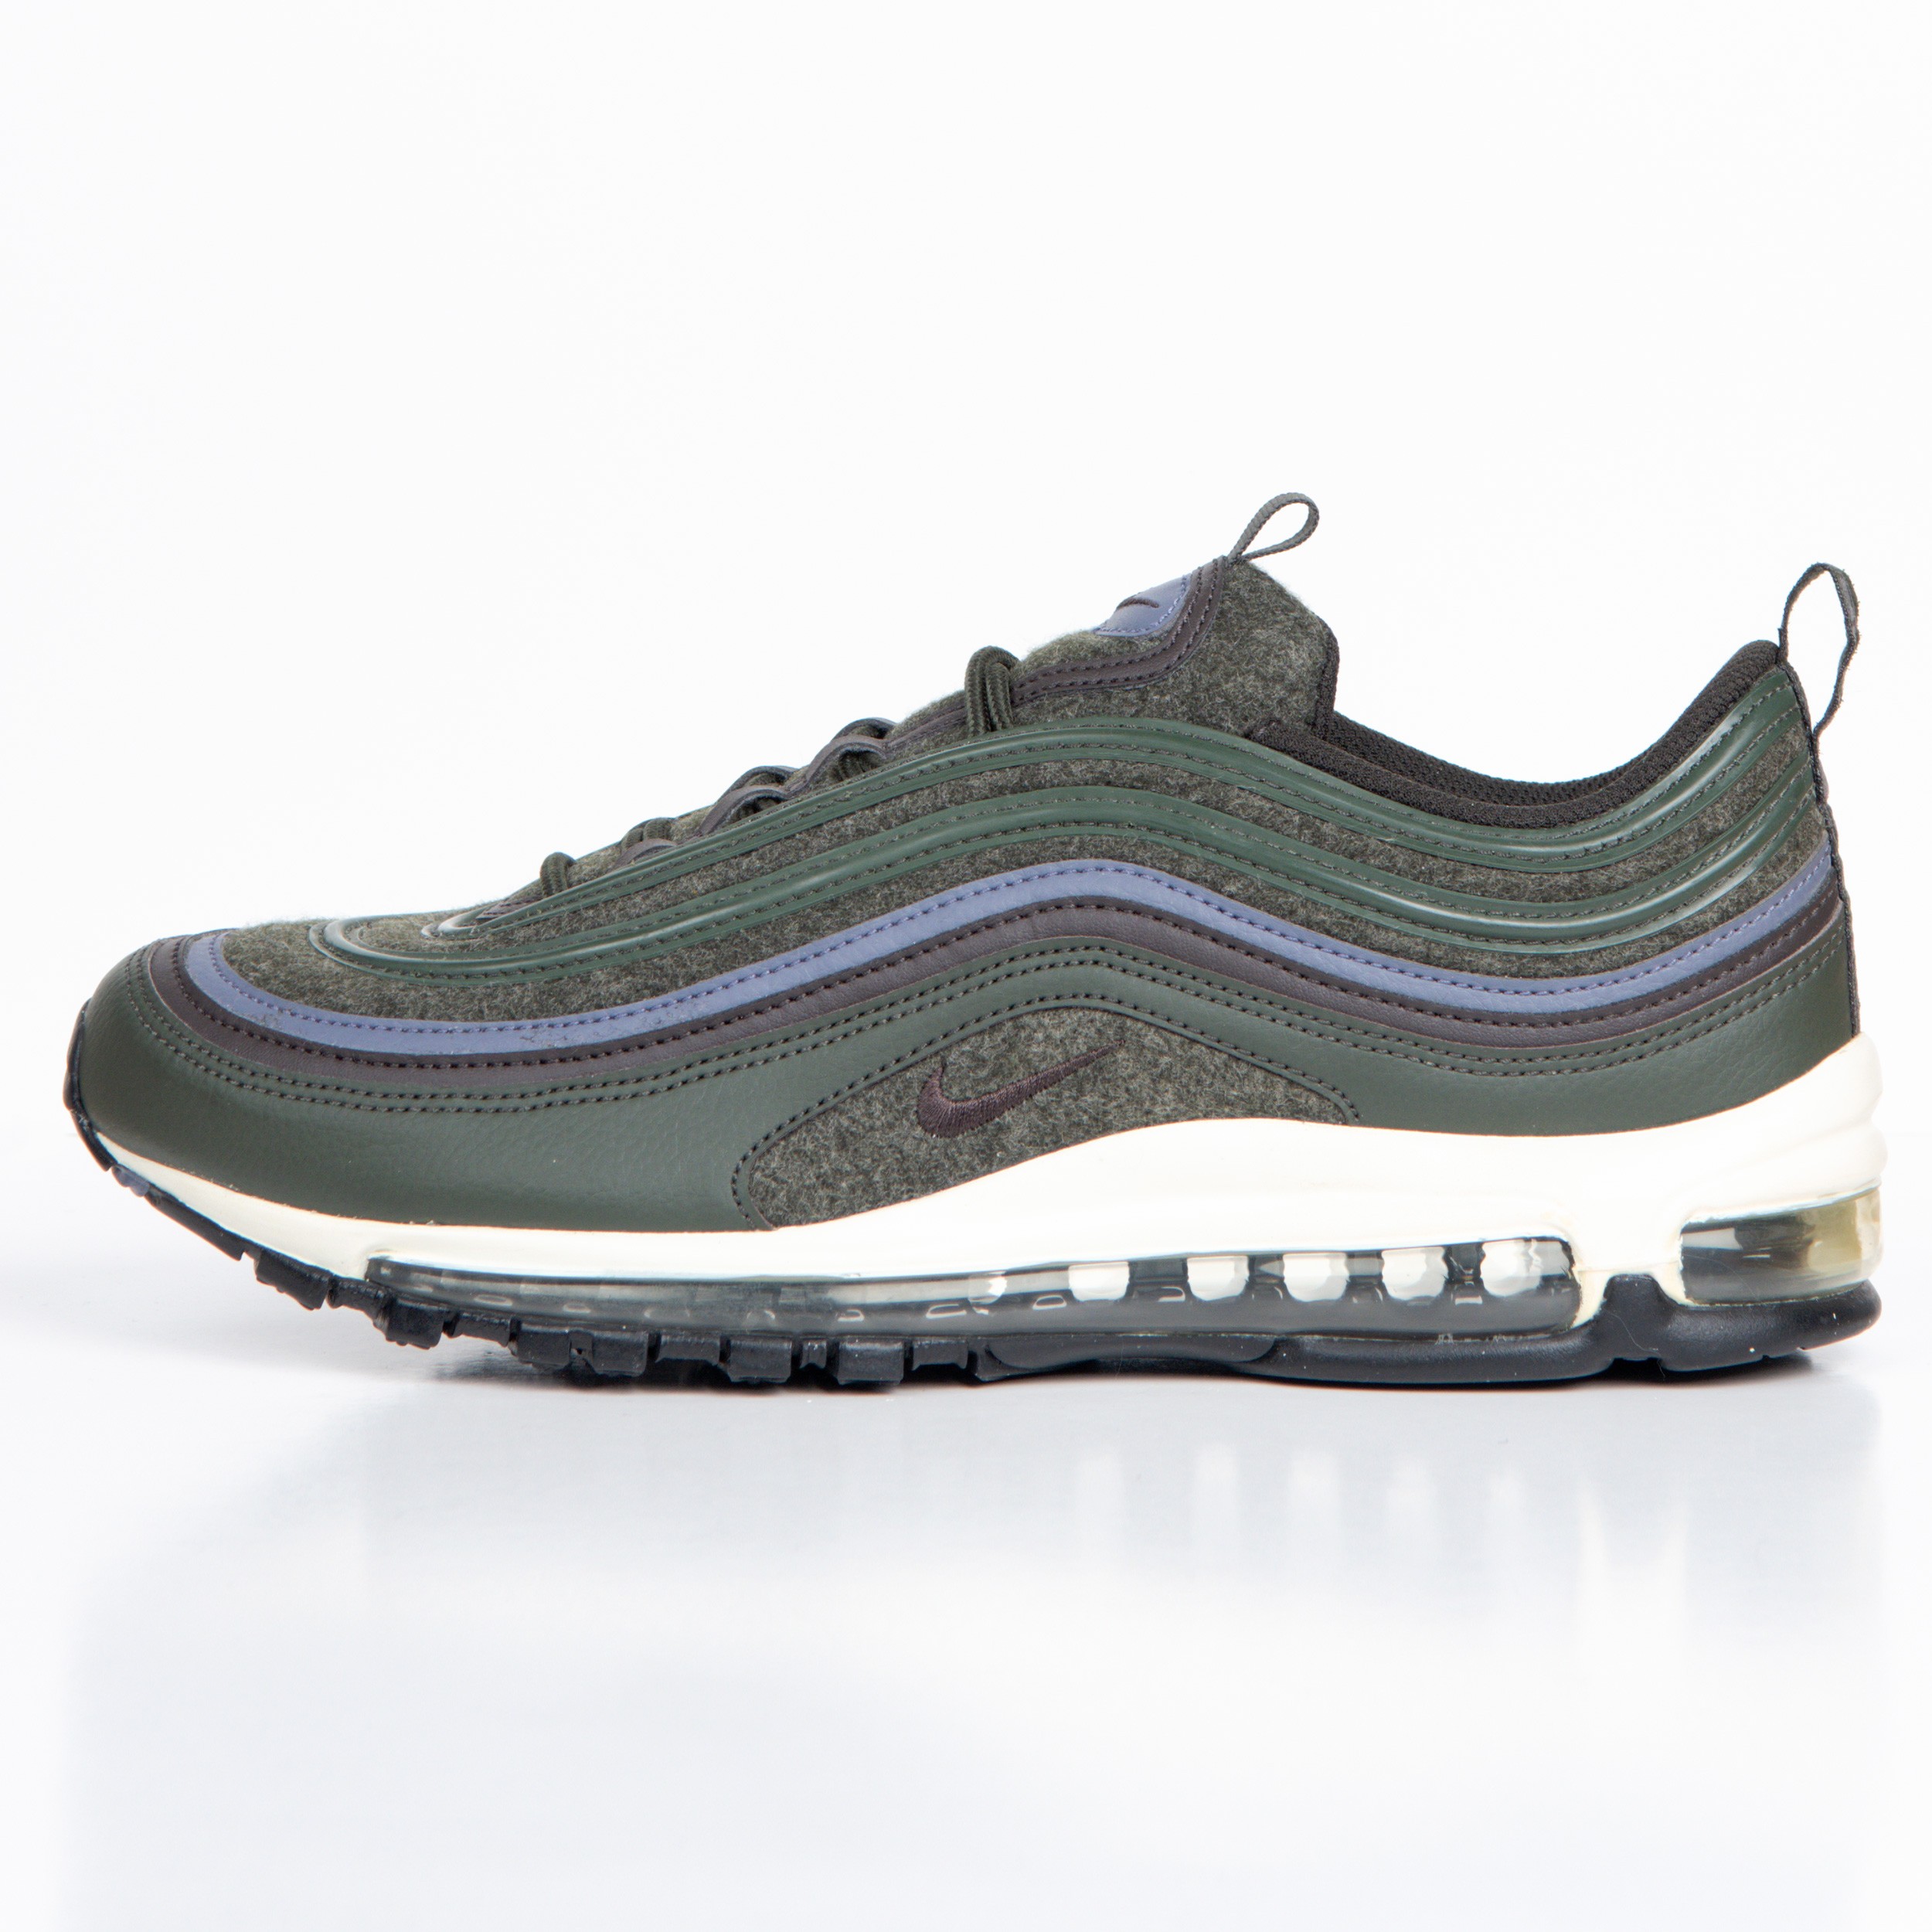 buffet ledematen Naschrift RE-POCKETS NIKE TRAINERS RE-POCKETS Nike Air Max 97 Wool Sequoia